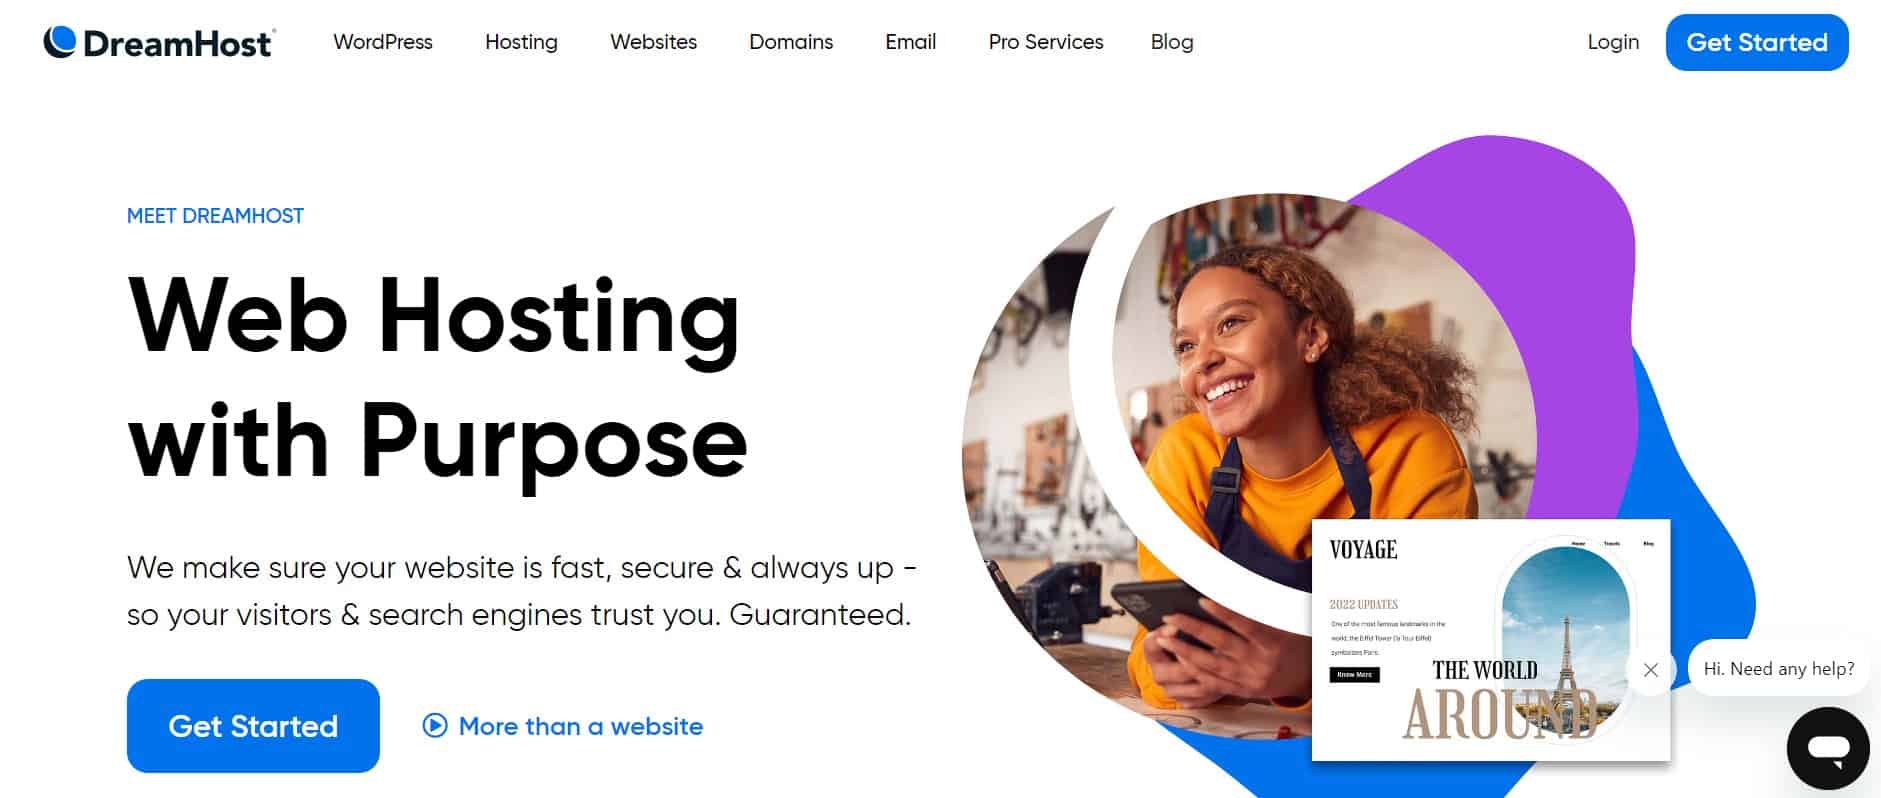 Dreamhost Home Page